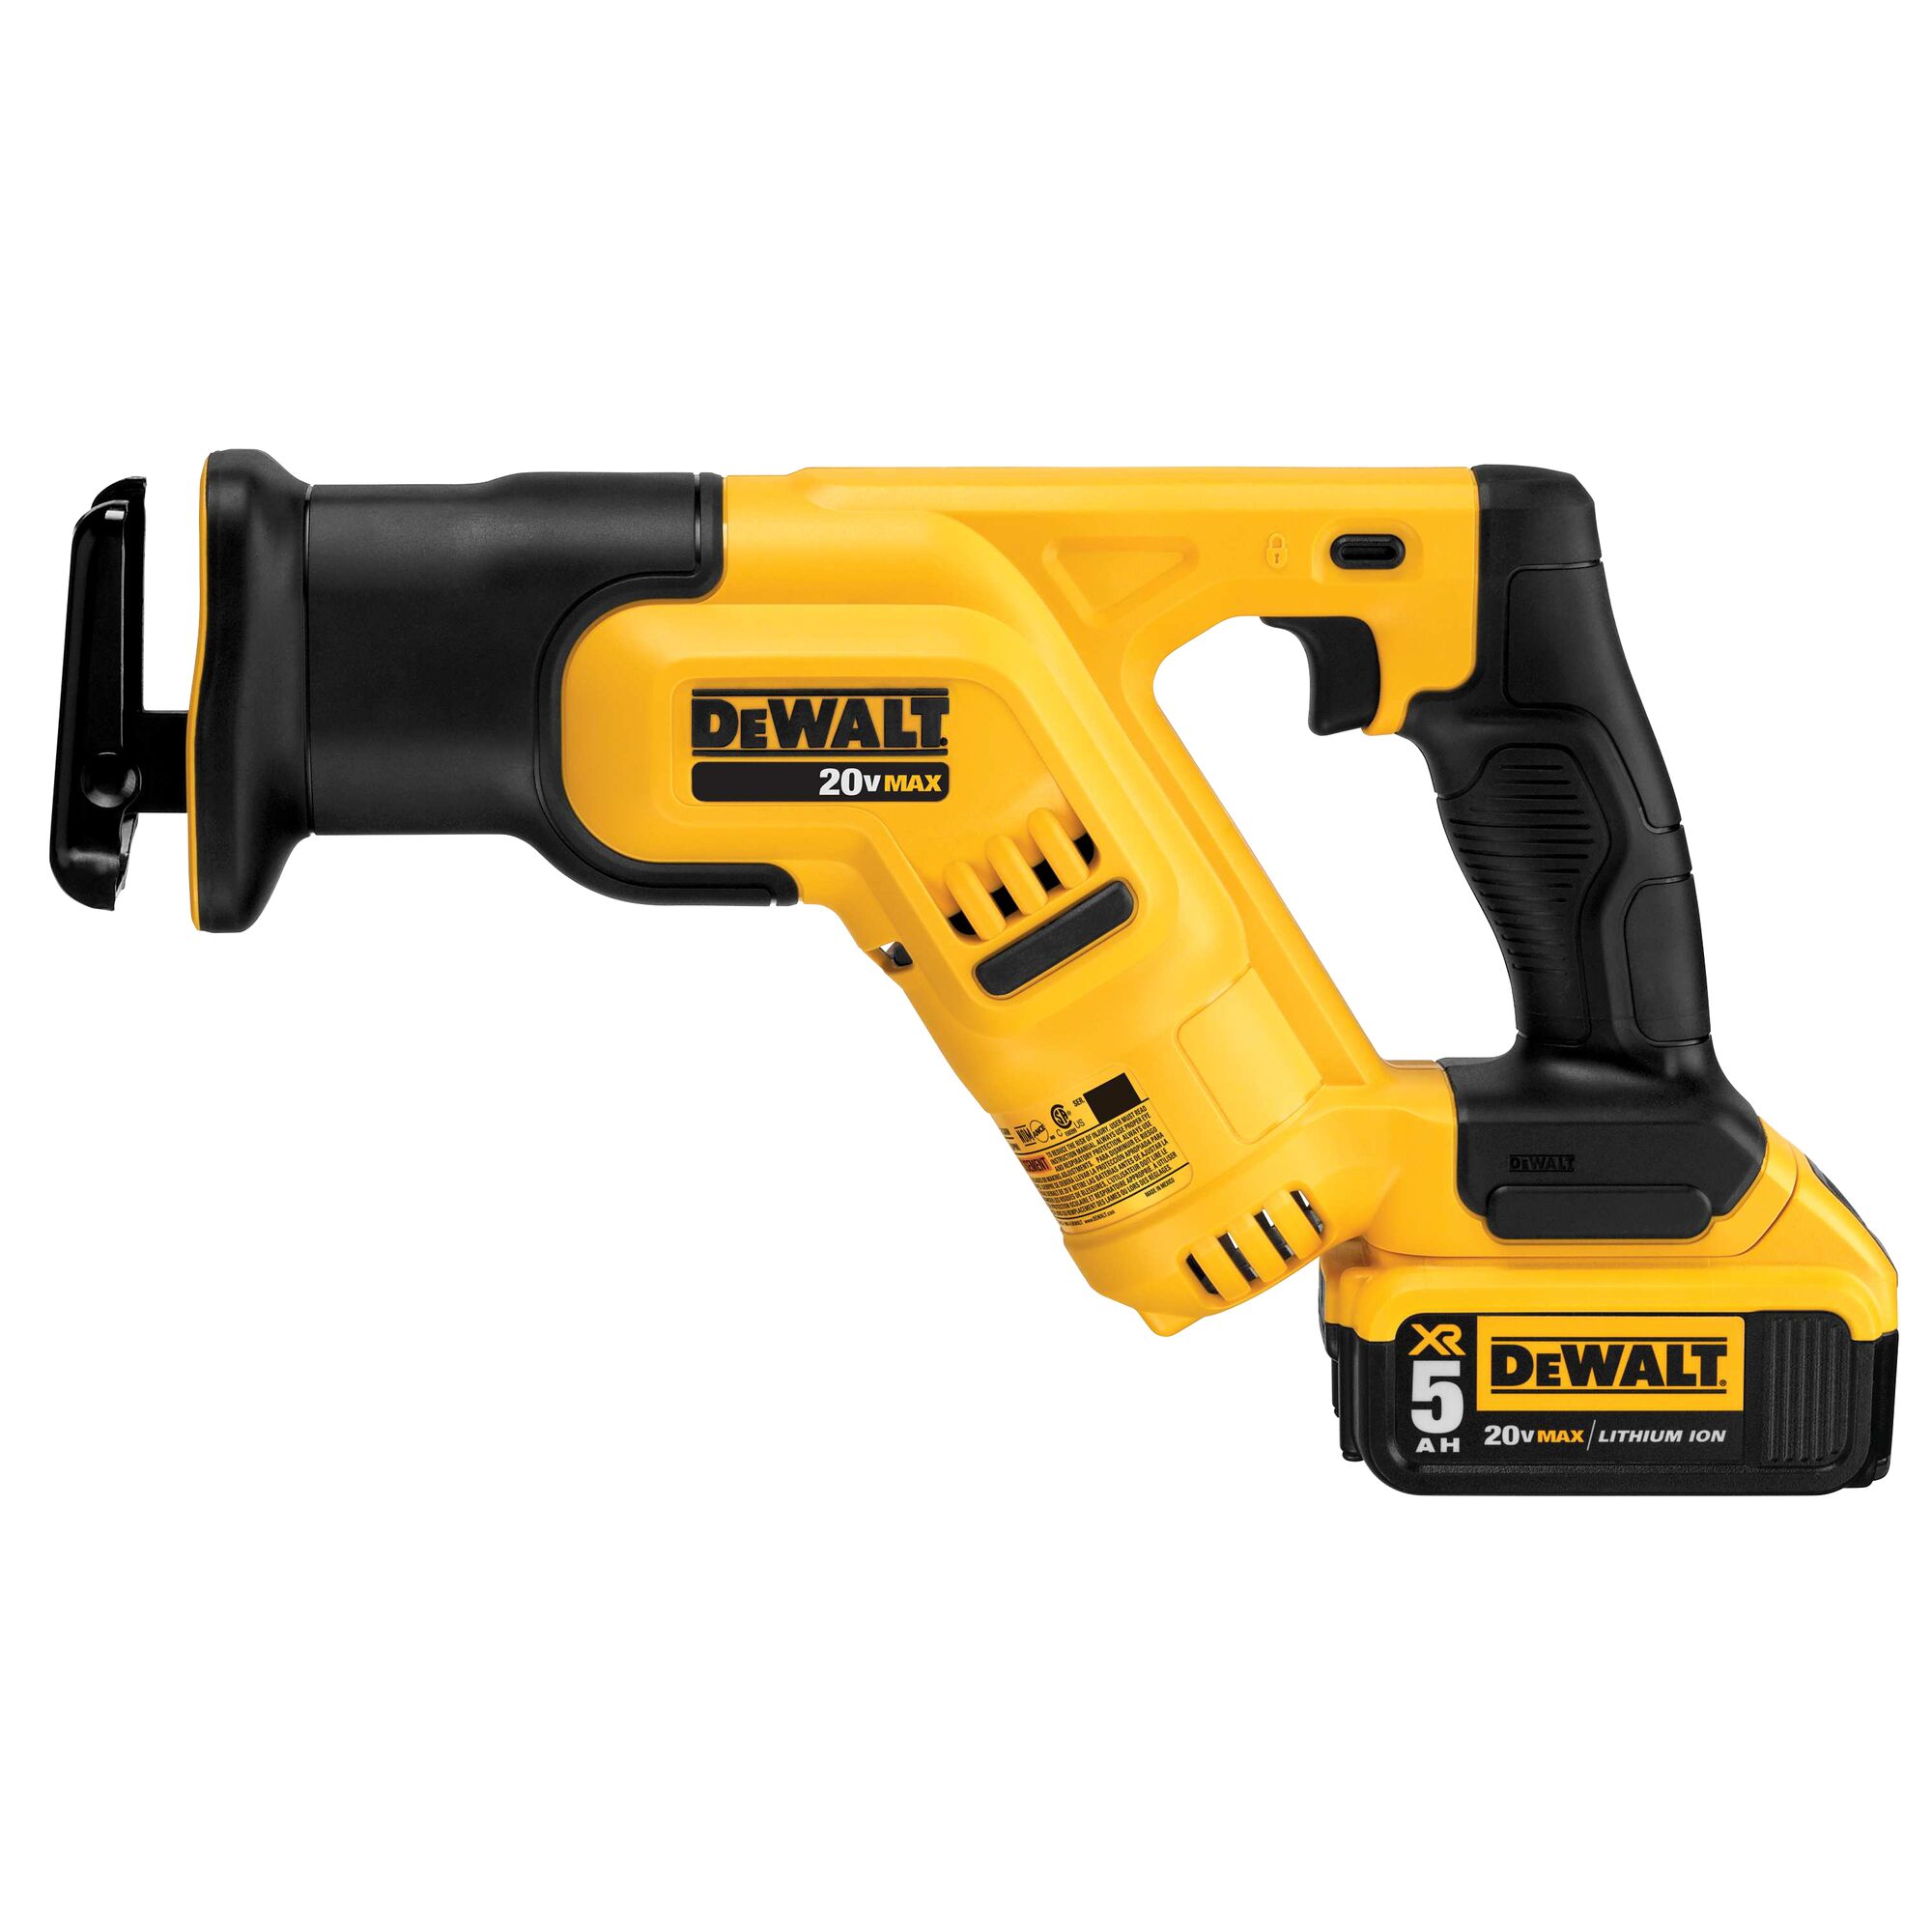 DEWALT DCS387P1 20-volt Max Variable Speed Cordless Reciprocating Saw (Charger Included and Battery Included) - 1